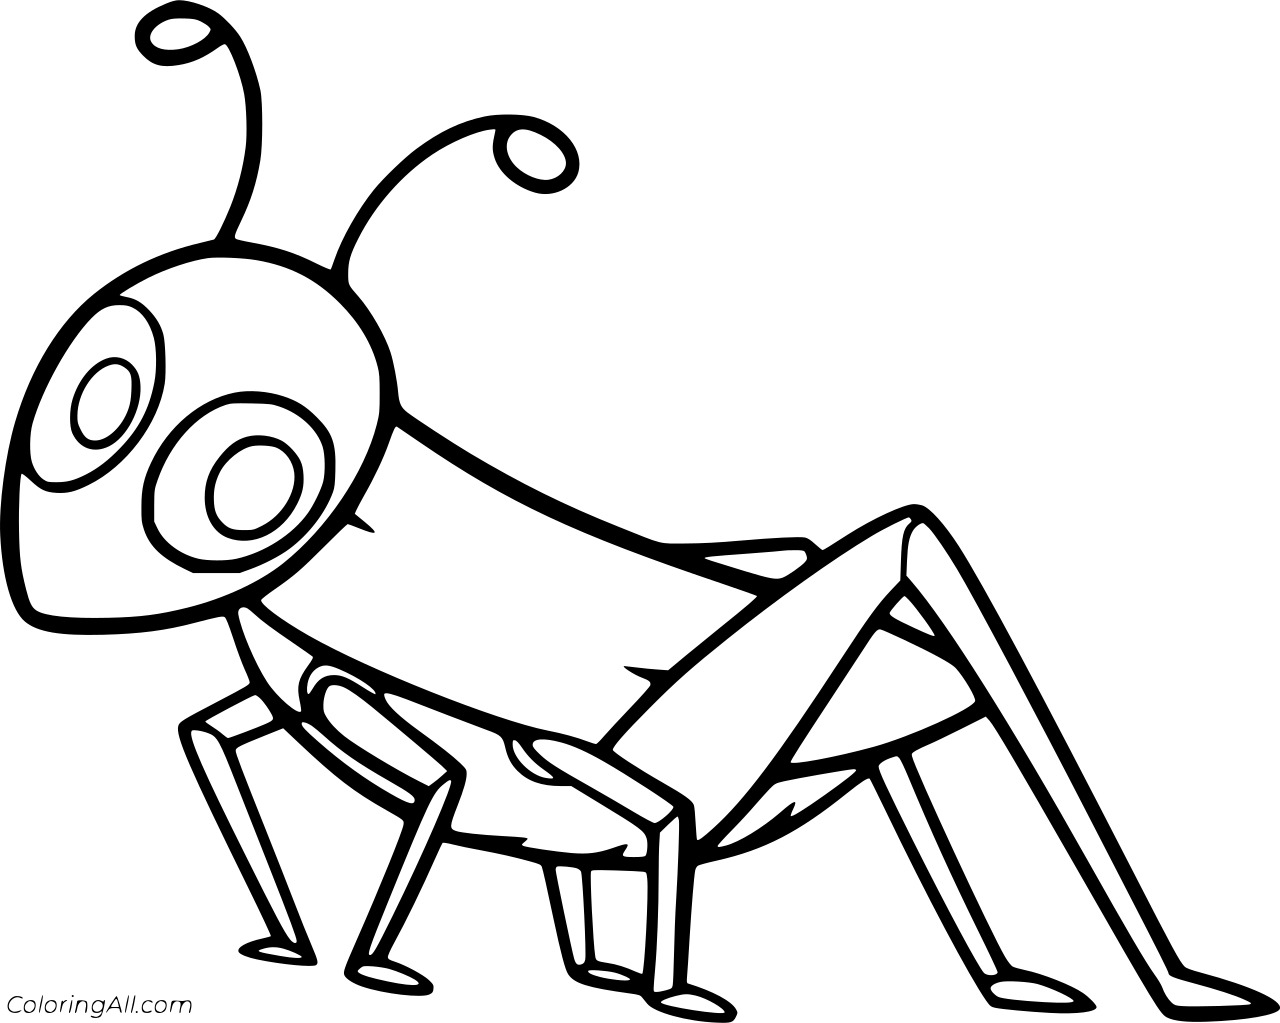 Easy Cartoon Grasshopper Free Coloring Page